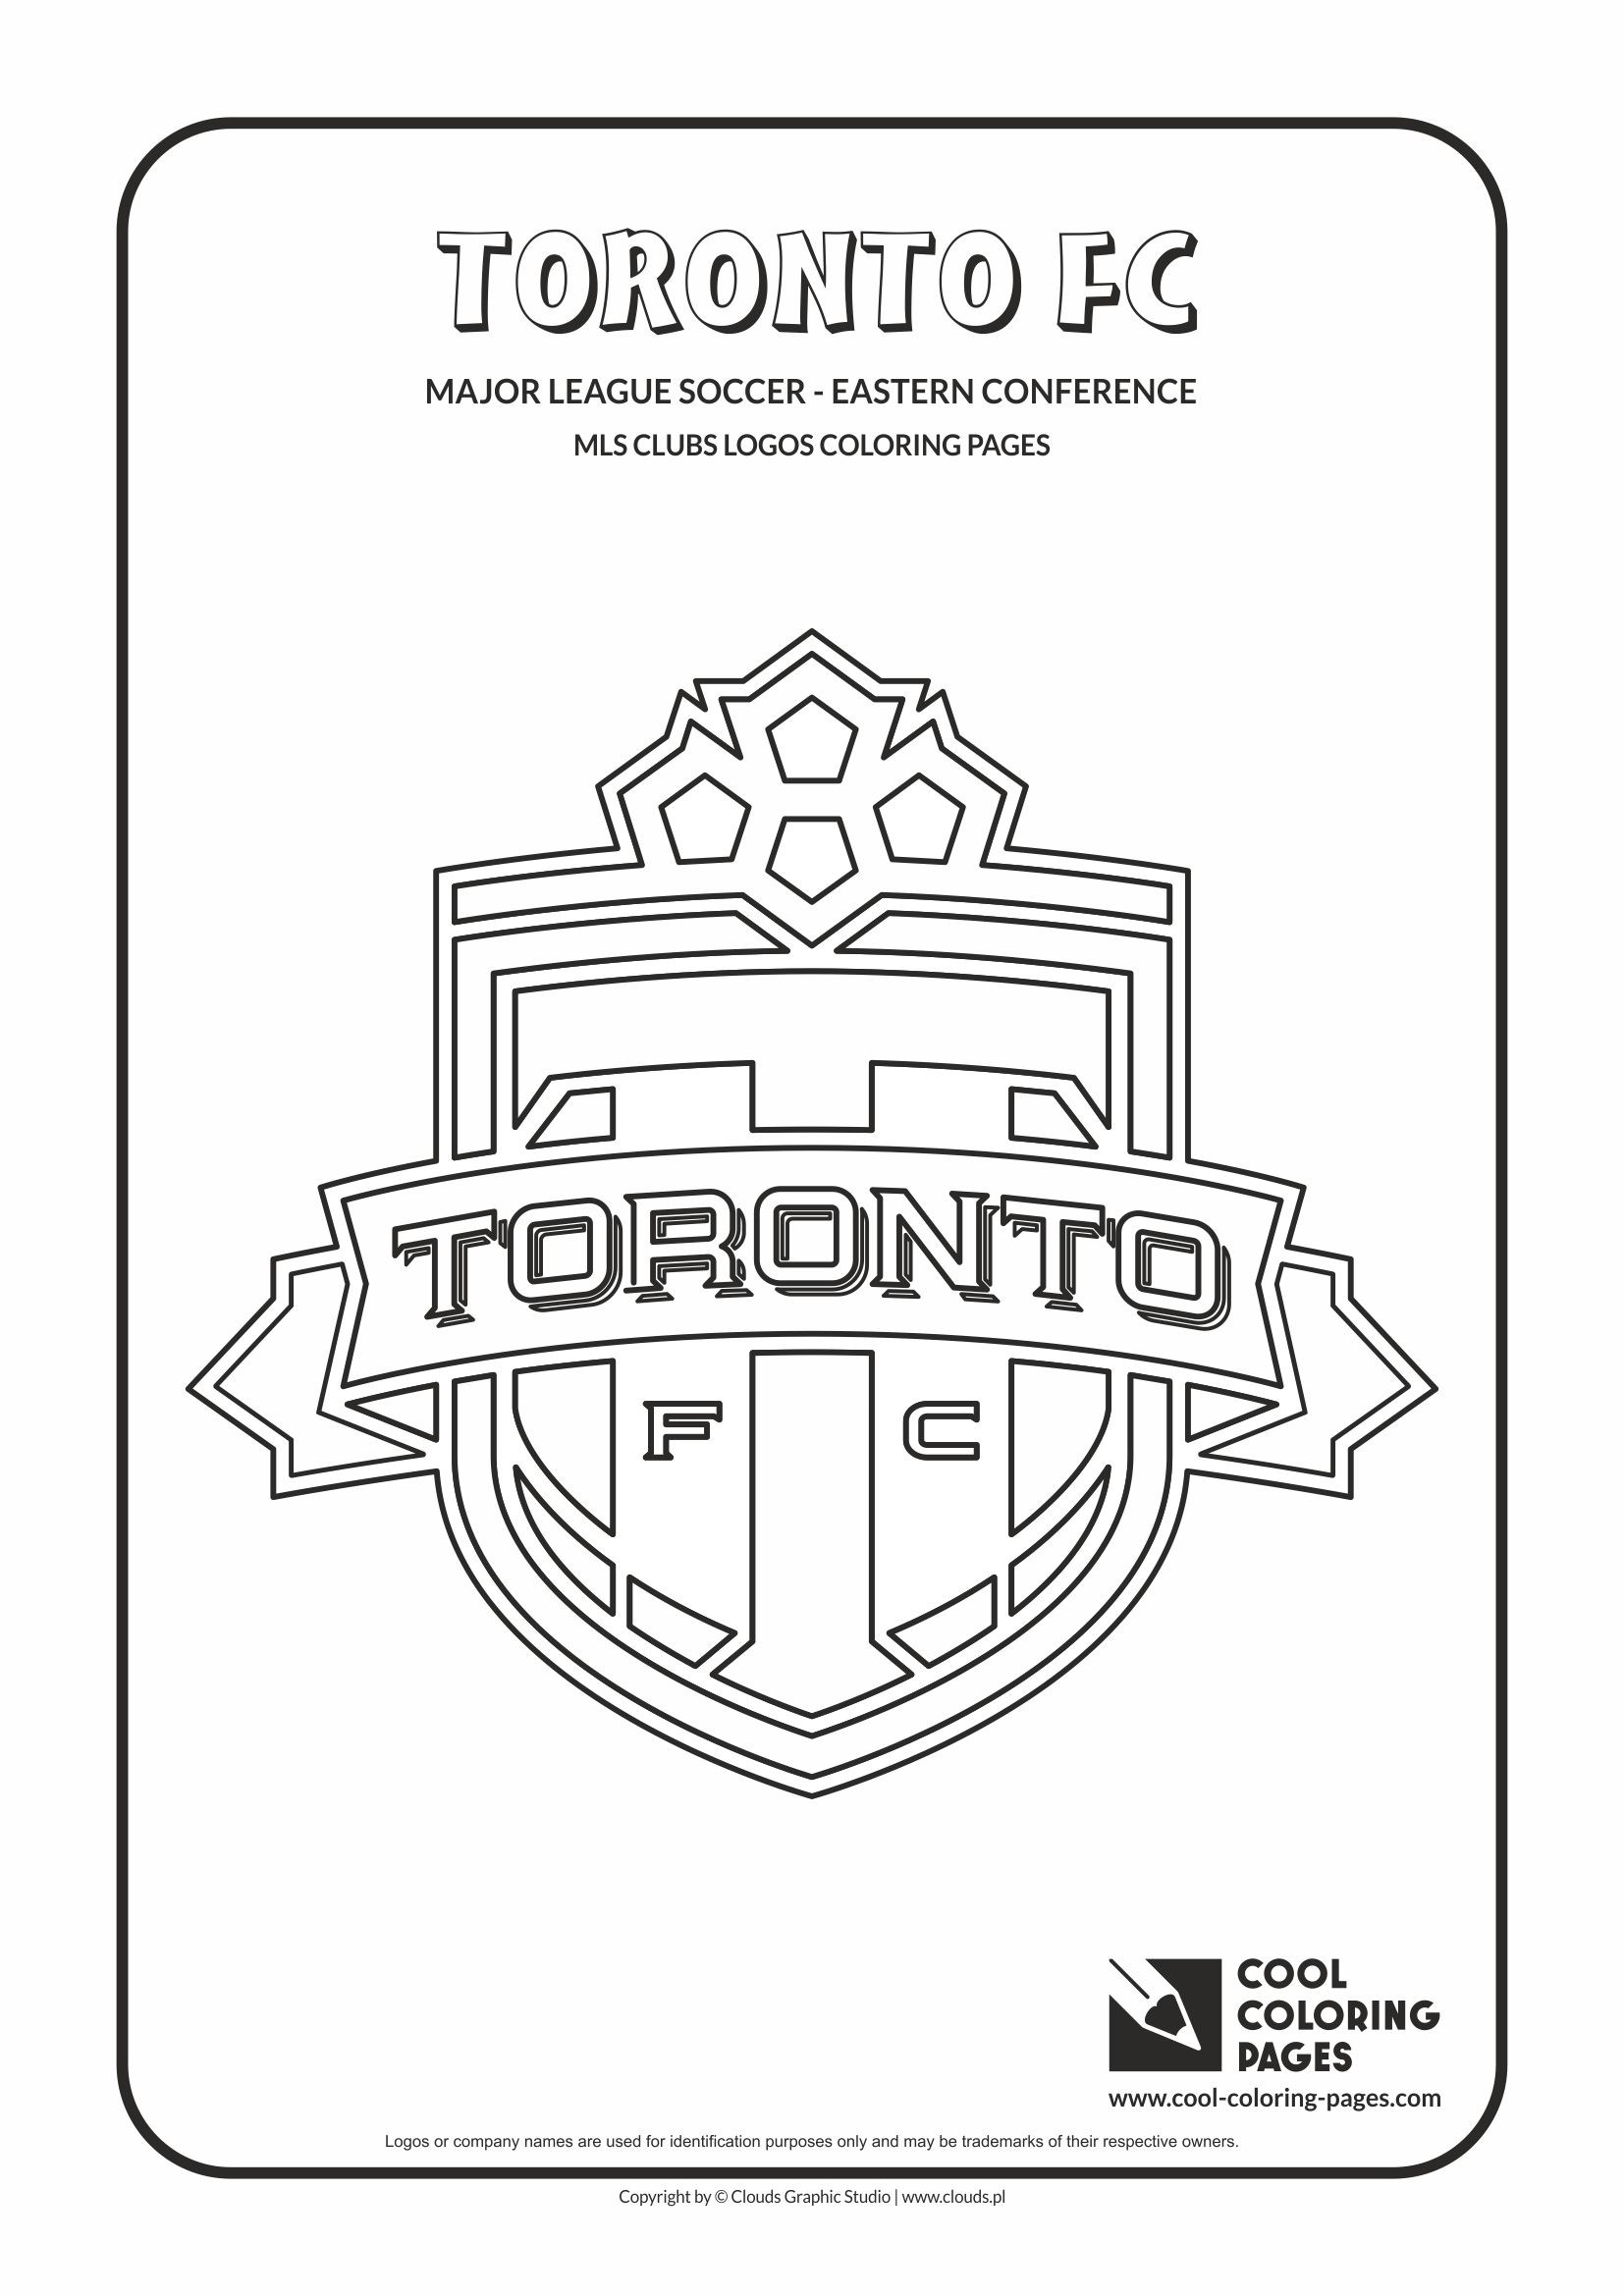 Cool Coloring Pages - Major League Soccer Logos - Eastern Conference / Toronto FC logo / Coloring page with Toronto FC logo